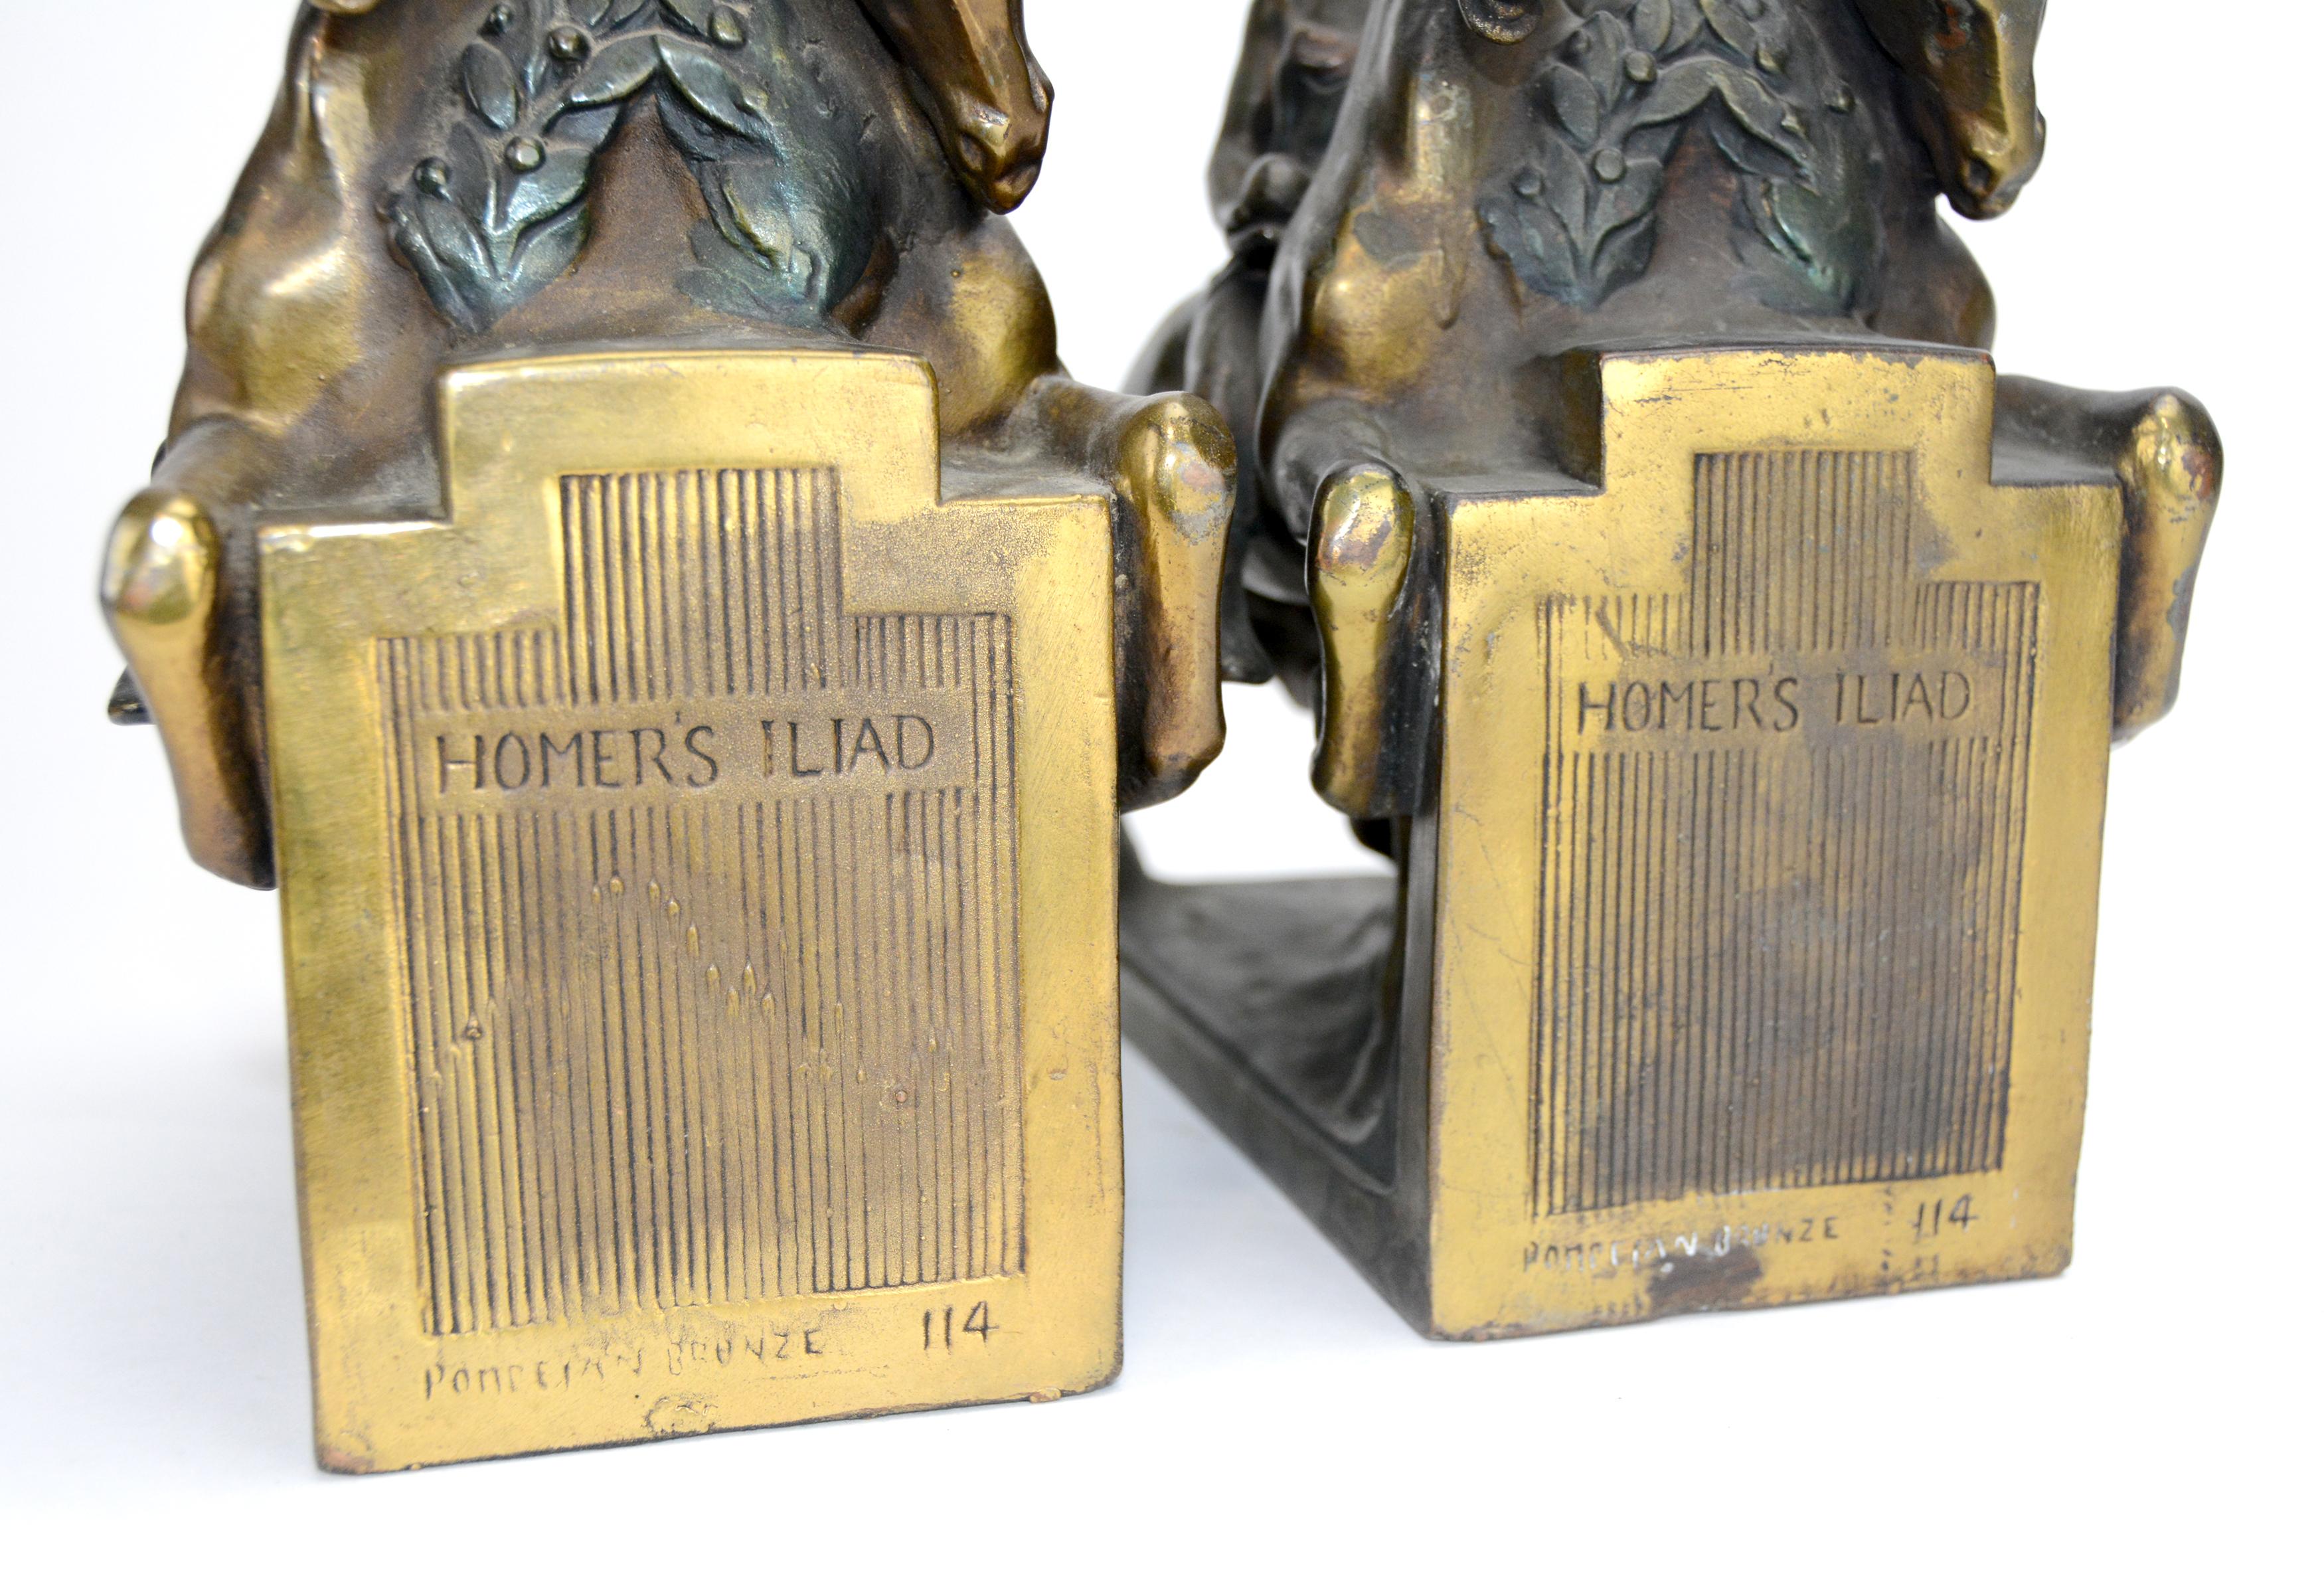 1924 Pair of Homer's Iliad Horseman Pompeian Bronze Bookends with Original Color For Sale 5